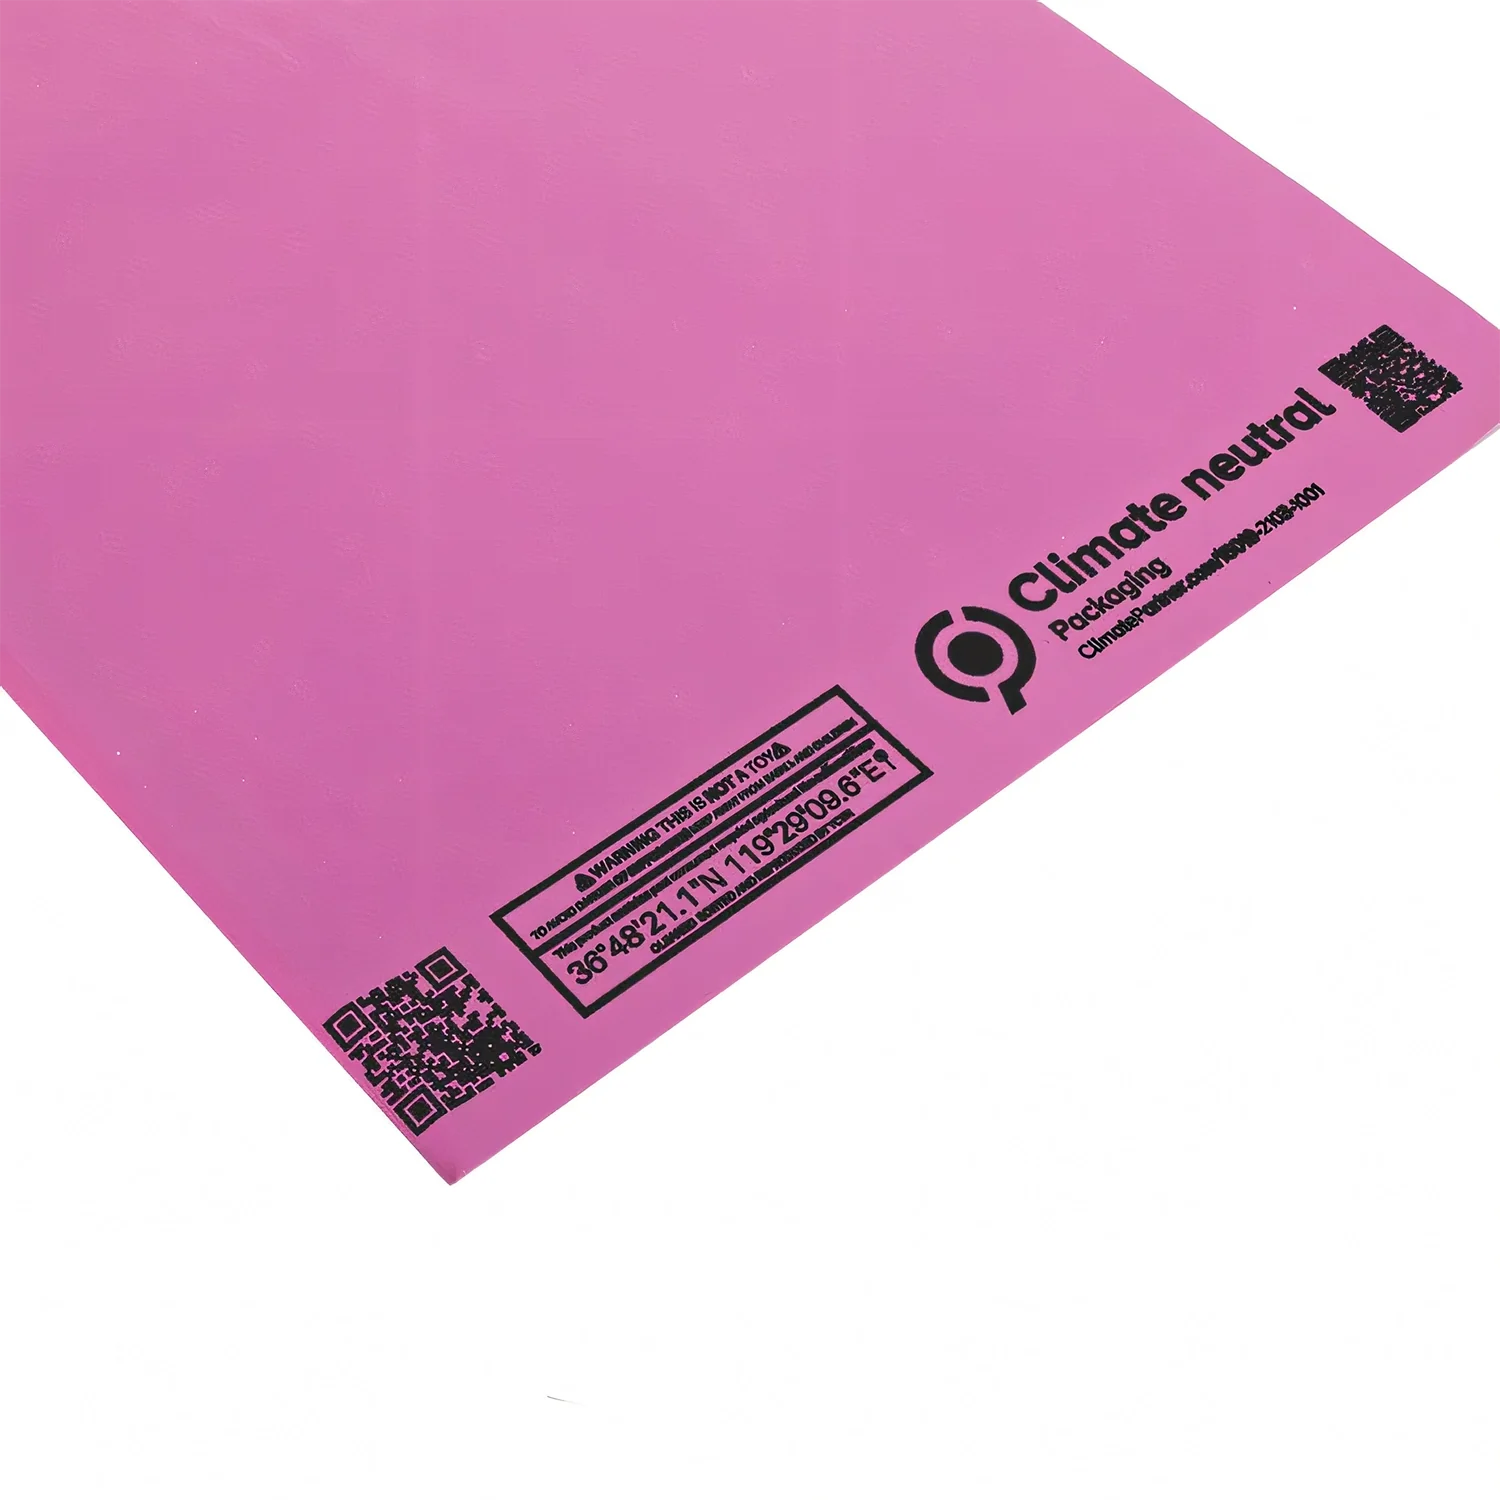 Pink Mailing Bags - Bags for Parcels 17x22 Inch